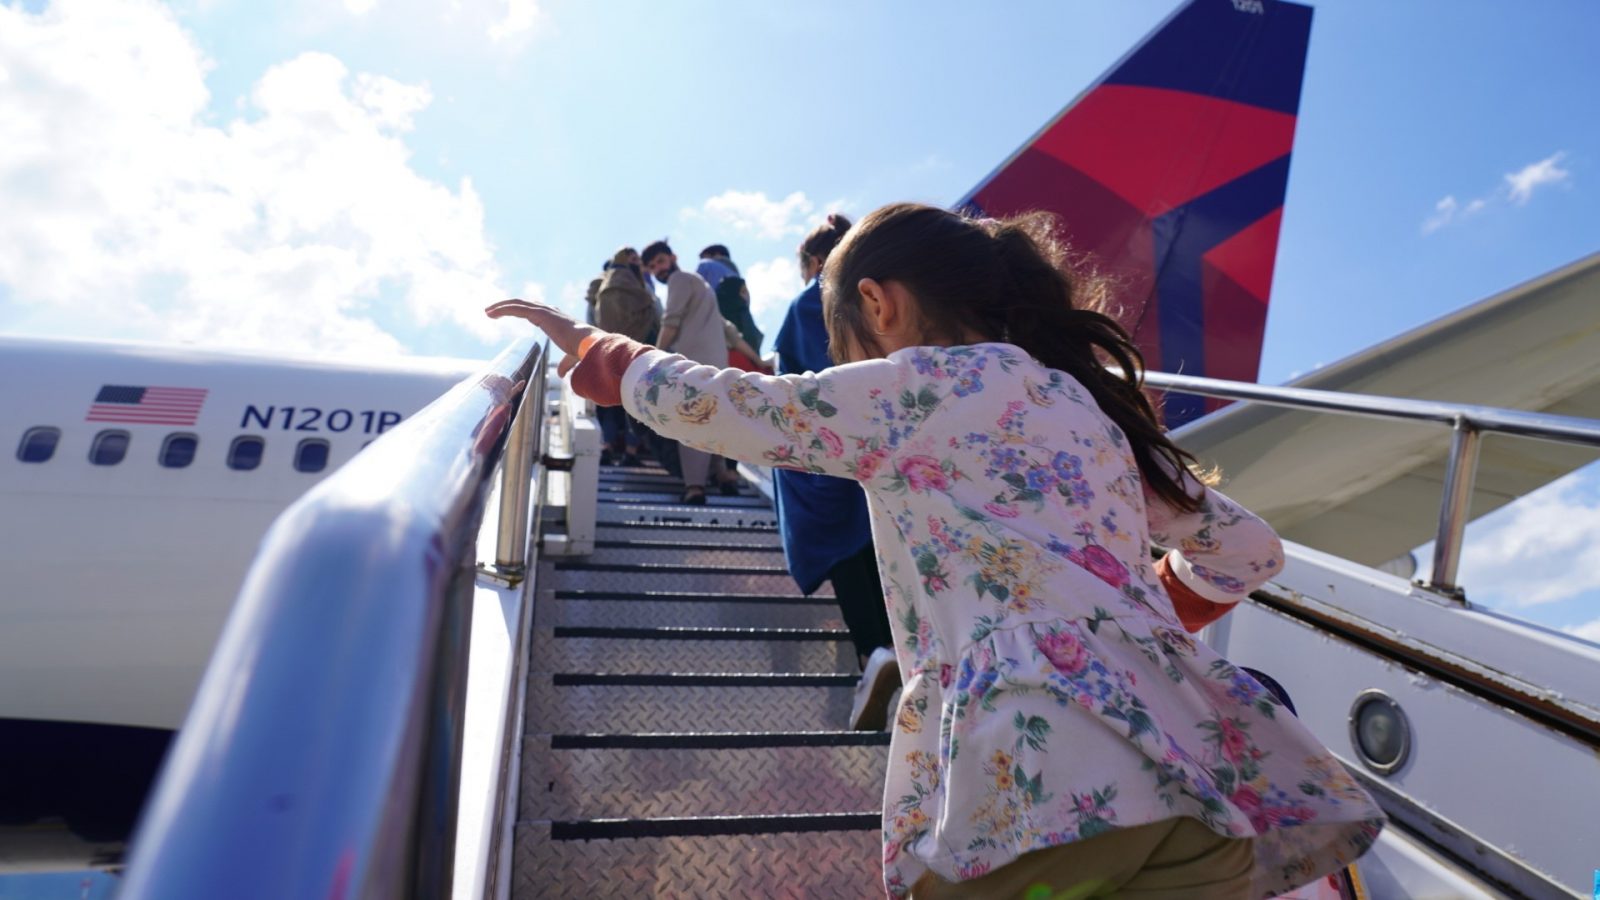 A young Afghan refugee boards a Delta Air Lines plane at Ramstein air force base in Germany bound for the United States